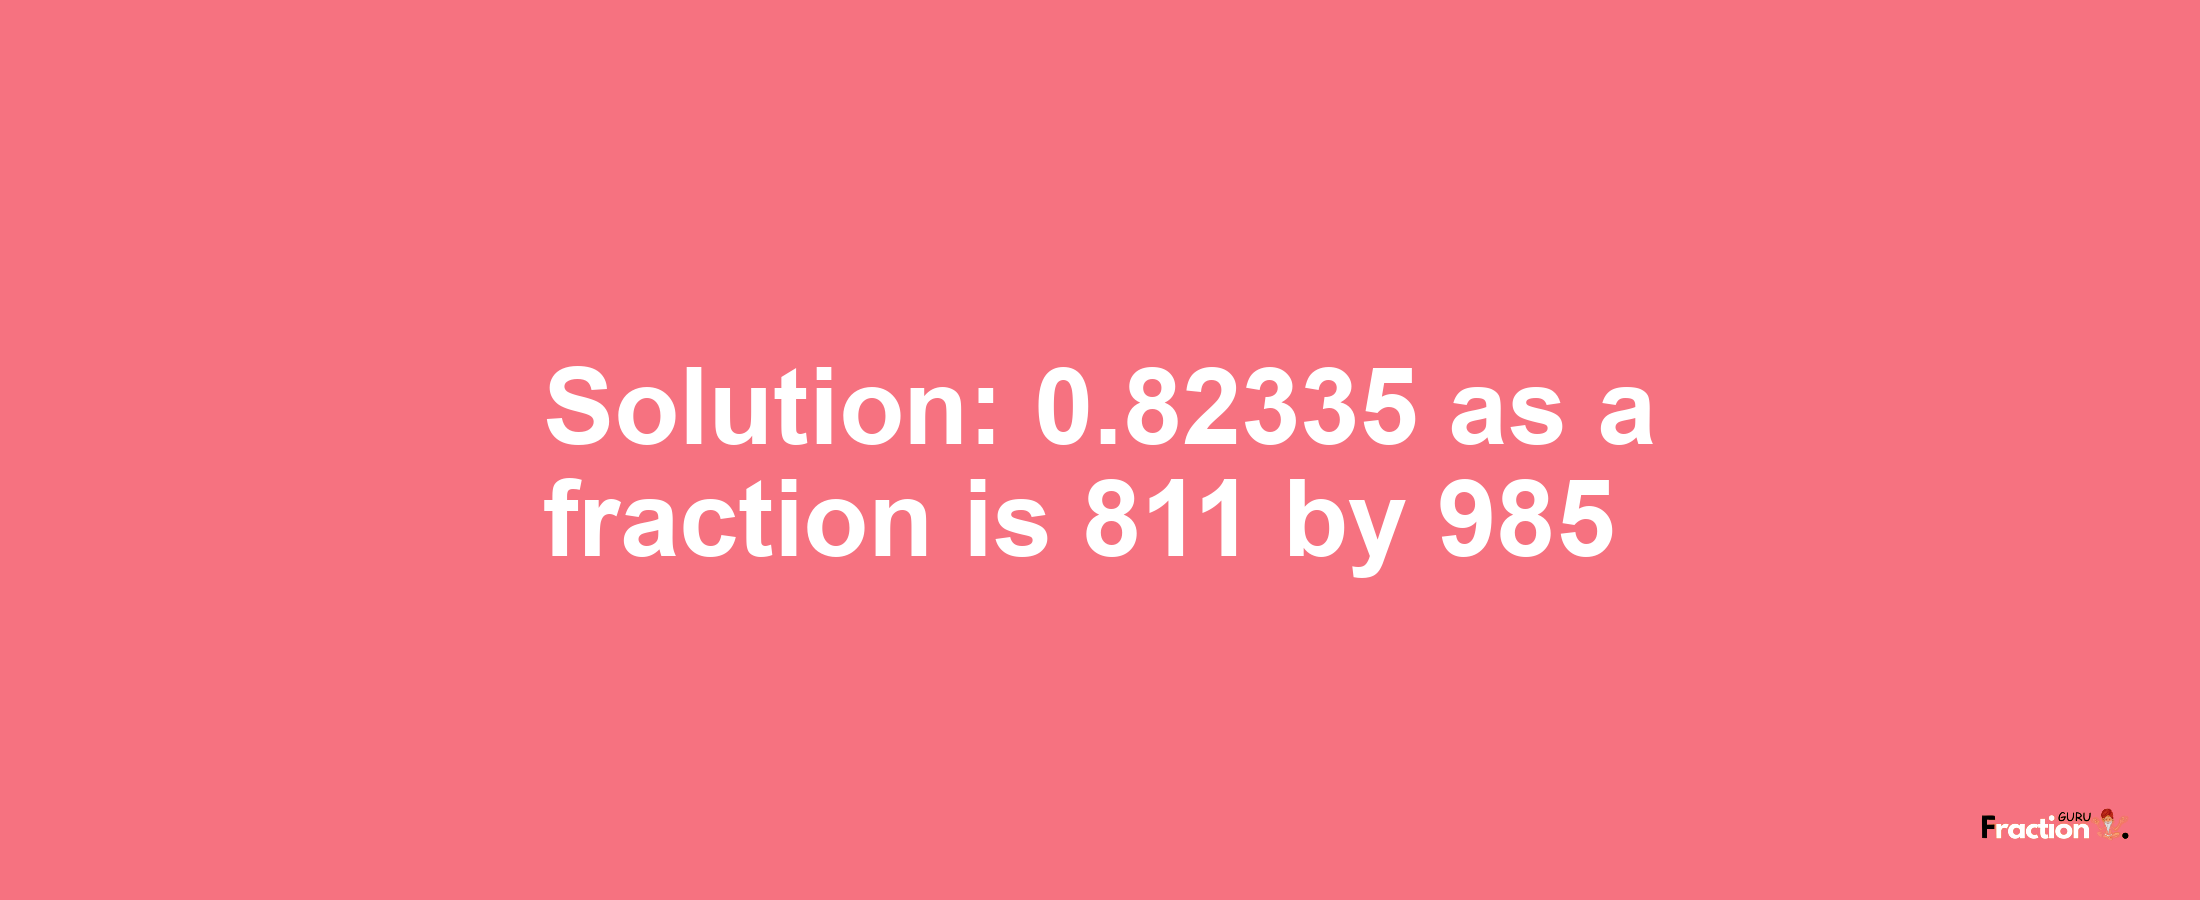 Solution:0.82335 as a fraction is 811/985